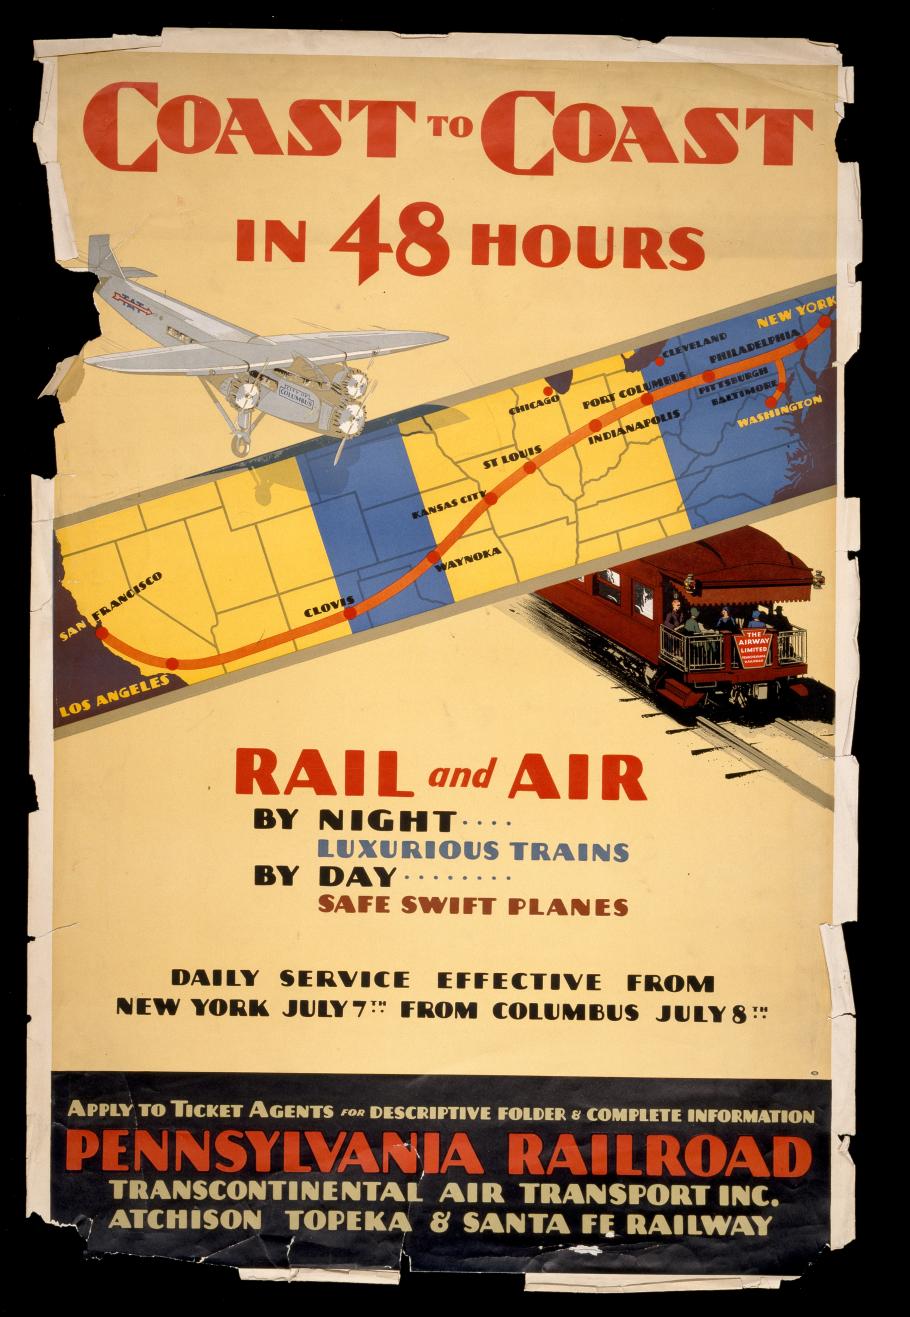 An poster advertising offering travel coast to coast in 48 hours. An illustration of a train, airplane, and cross-country route are in the middle of the poster. At the bottom it says rail and air by night...luxurious trains, by day...safe swift planes.